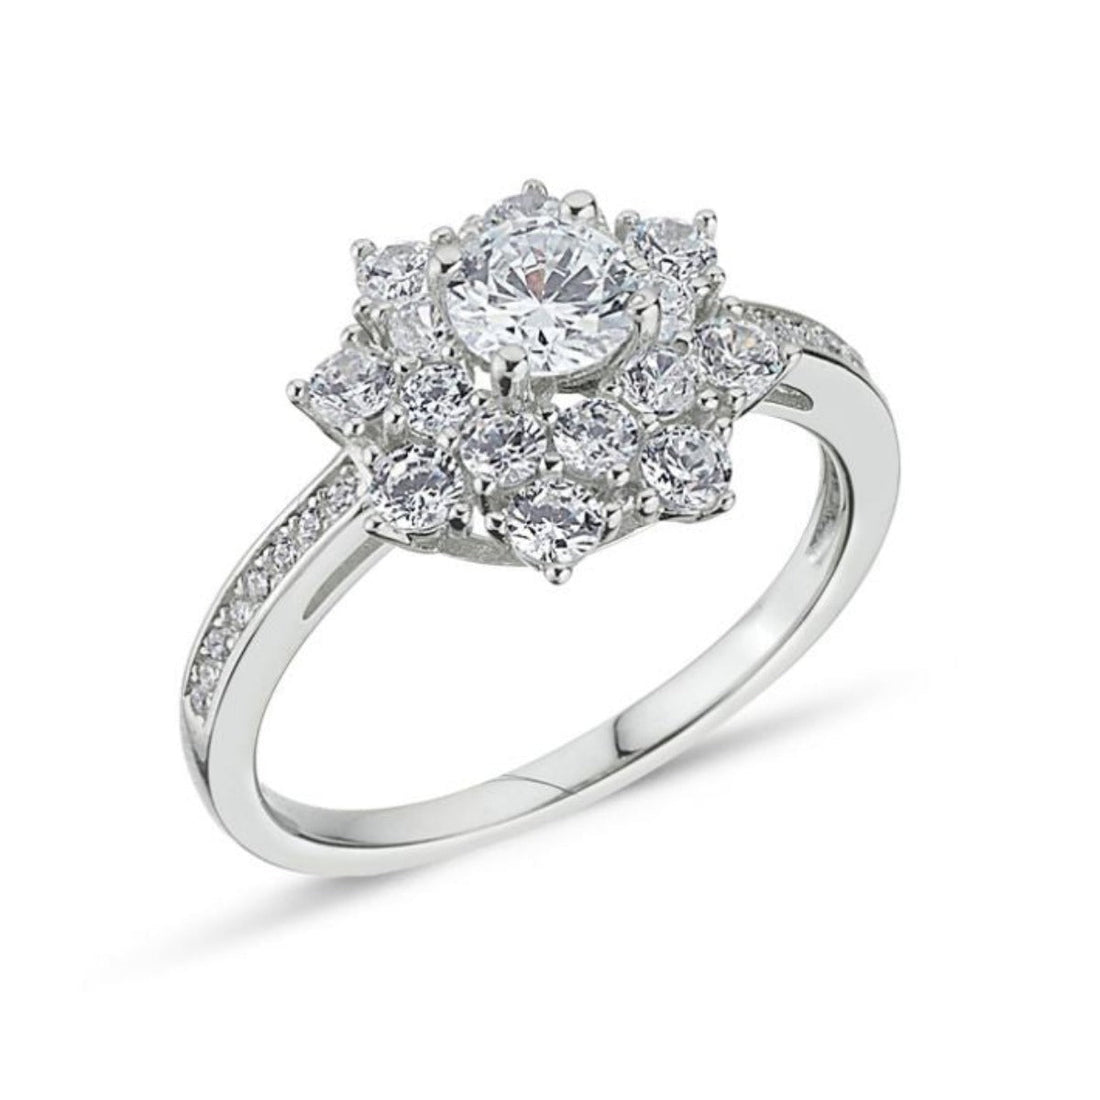 Three Tier Cubic Zirconia Cluster Engagement Ring in Rhodium Plated Silver